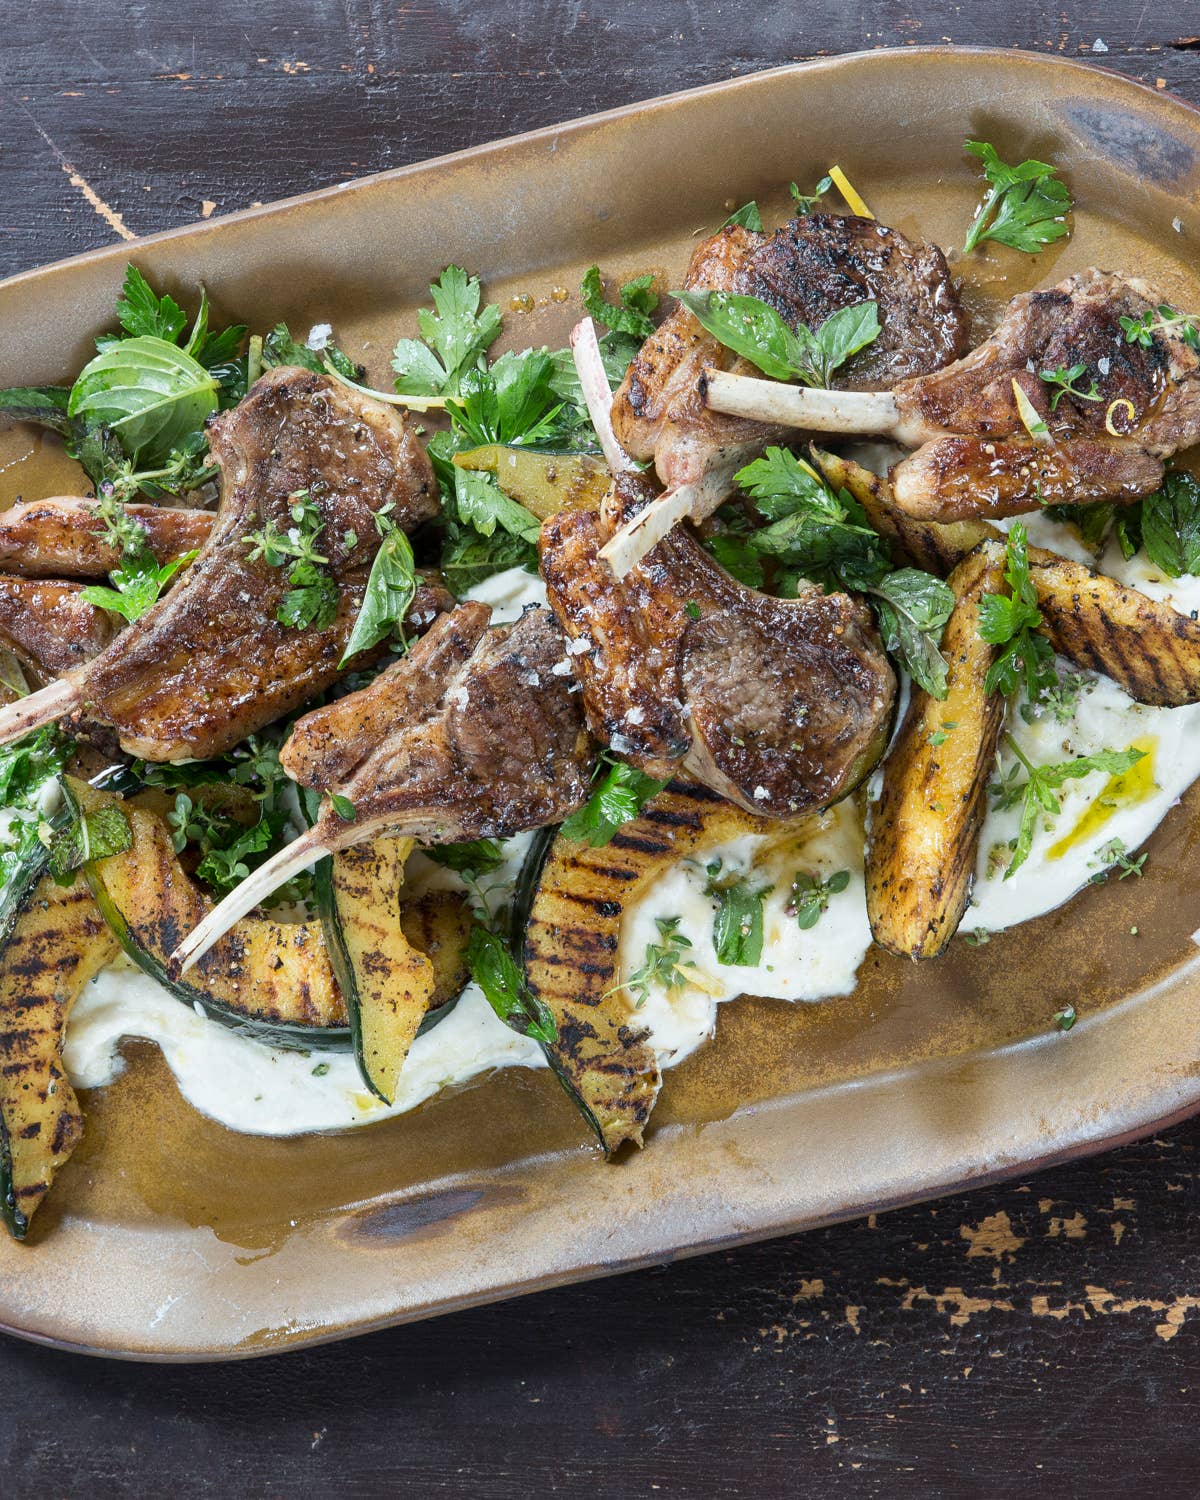 Grilled Lamb Chops and Squash with Herb Salad and Sunchokes